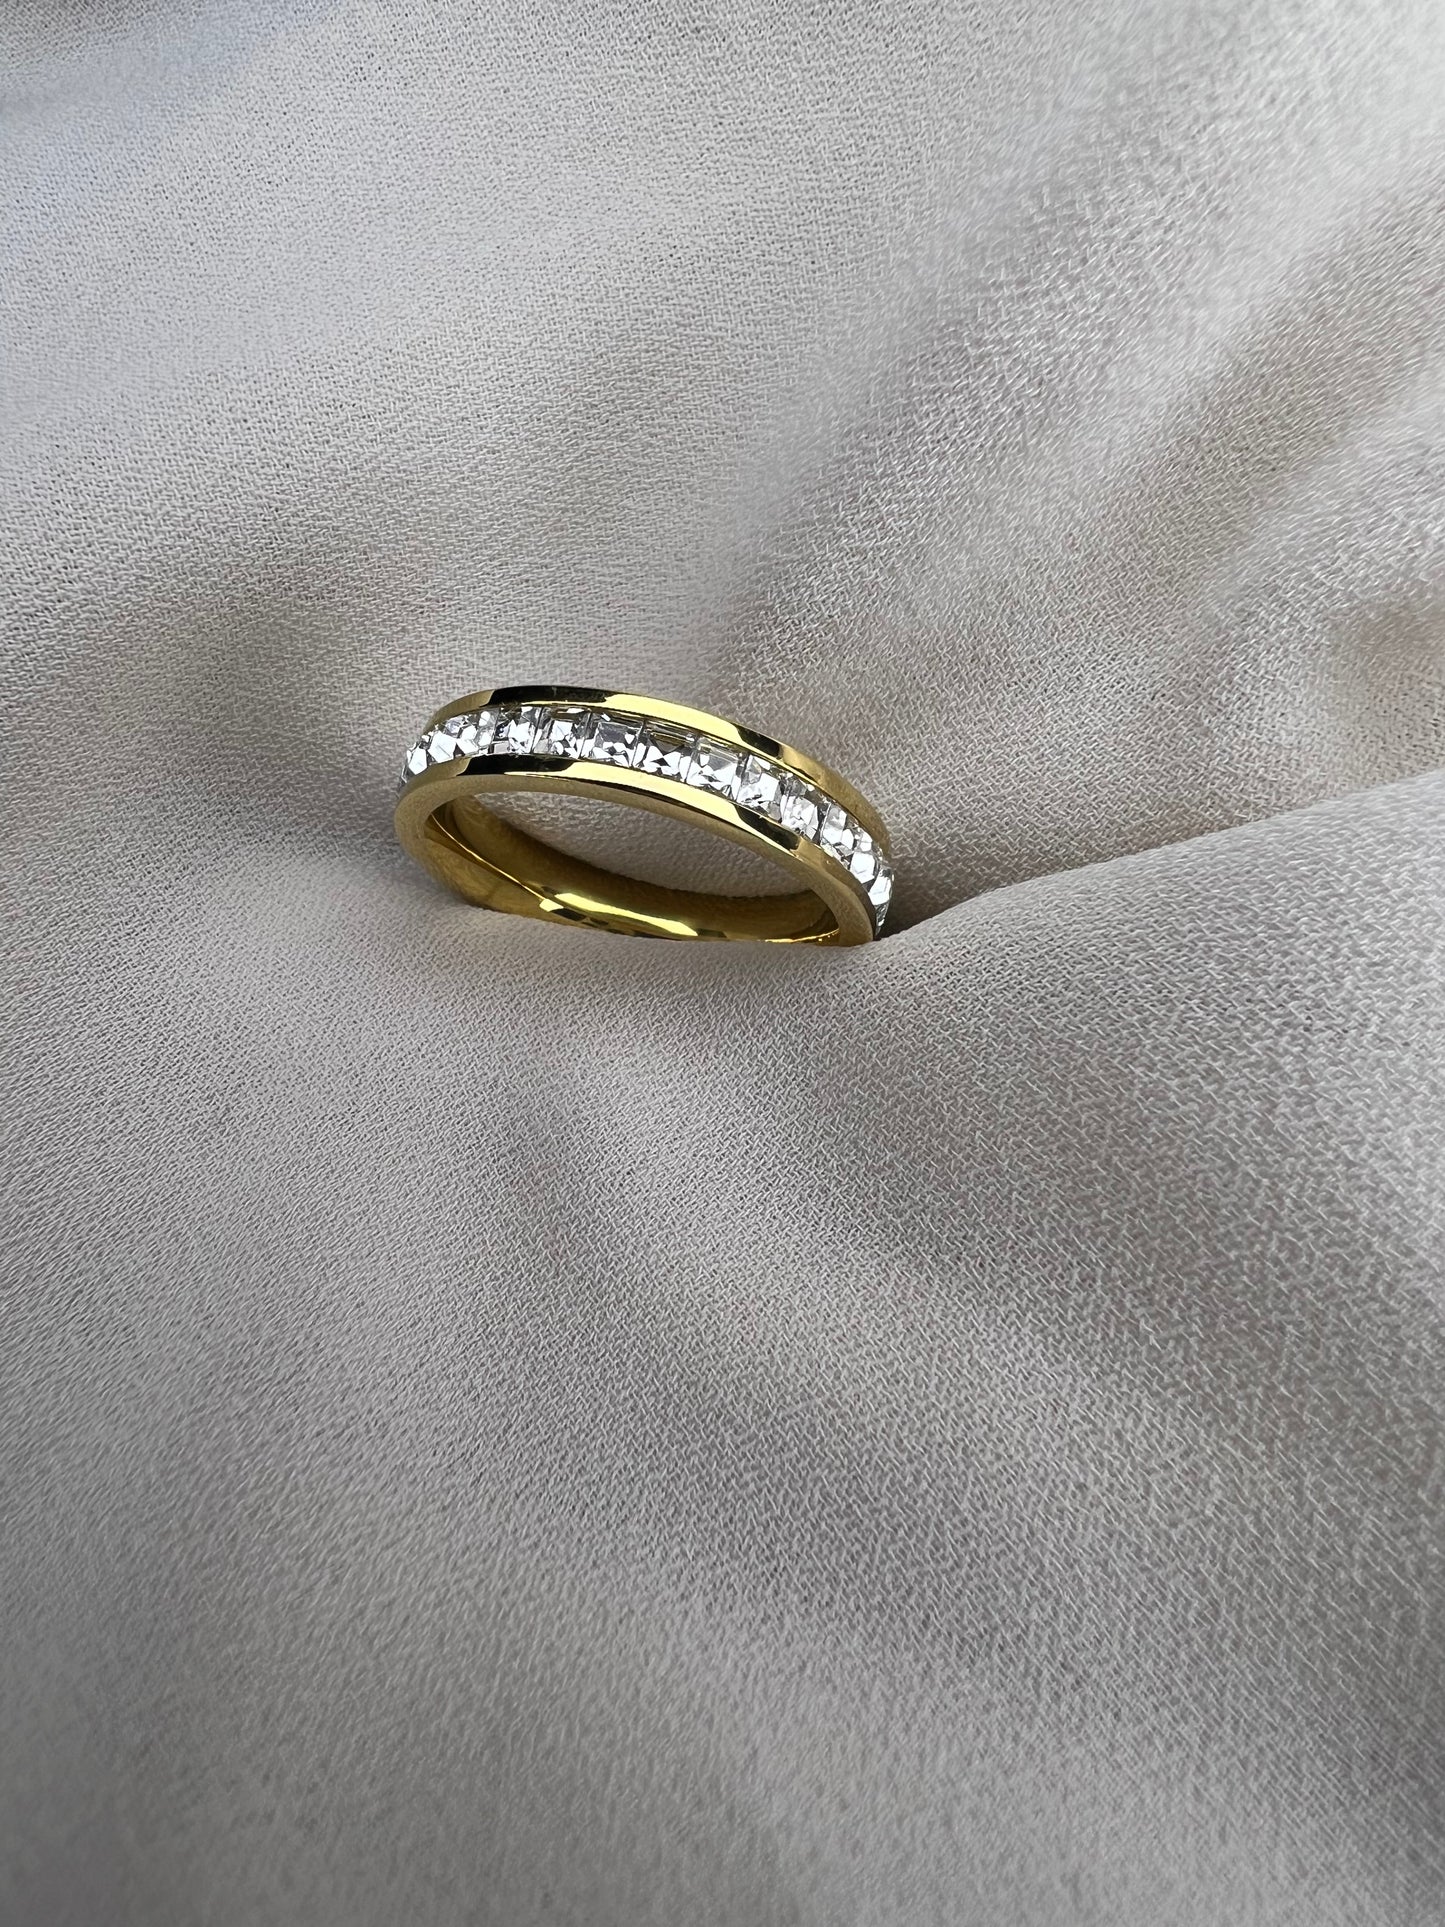 "18K gold-plated ring featuring a delicate leaf design, crafted from stainless steel and adorned with cubic zirconia stones. A unique and elegant piece by Jewels By Eterna."